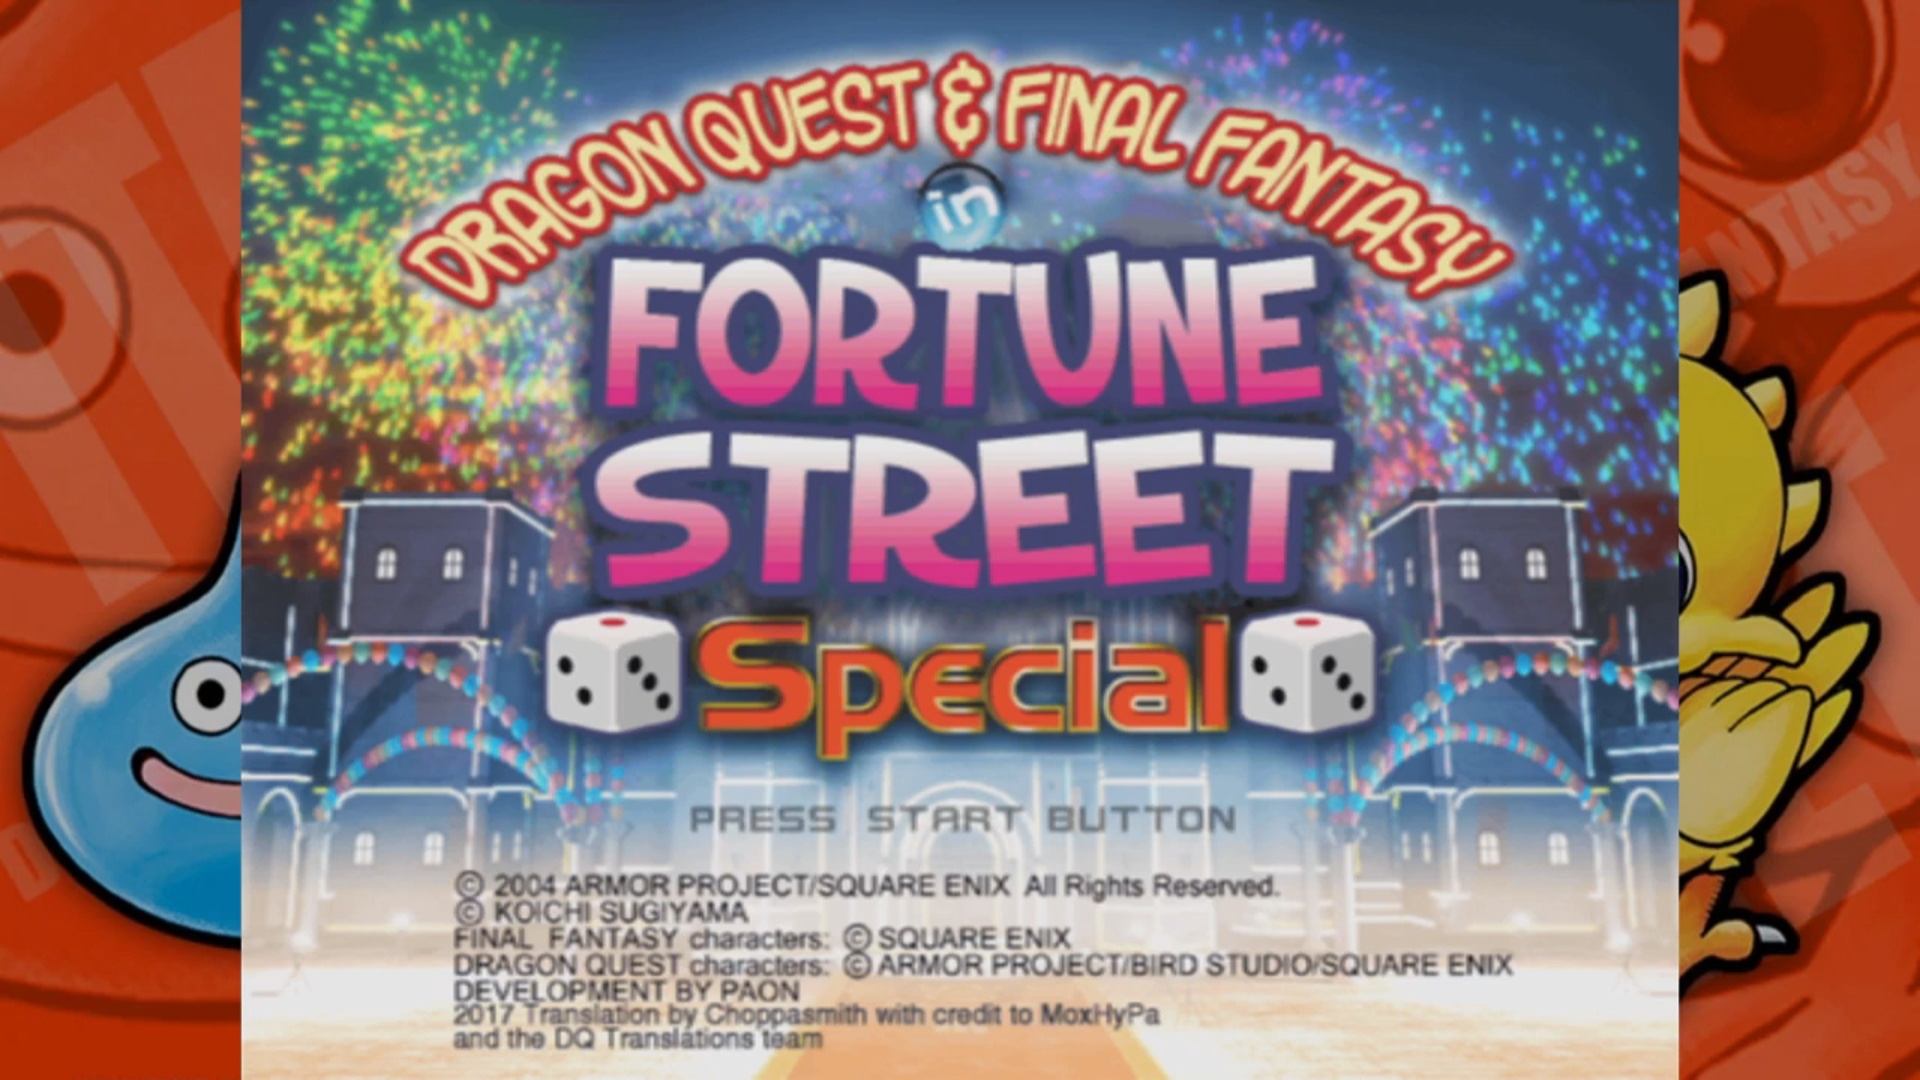 fortune street special yggdrasil 2  another board to tidus over